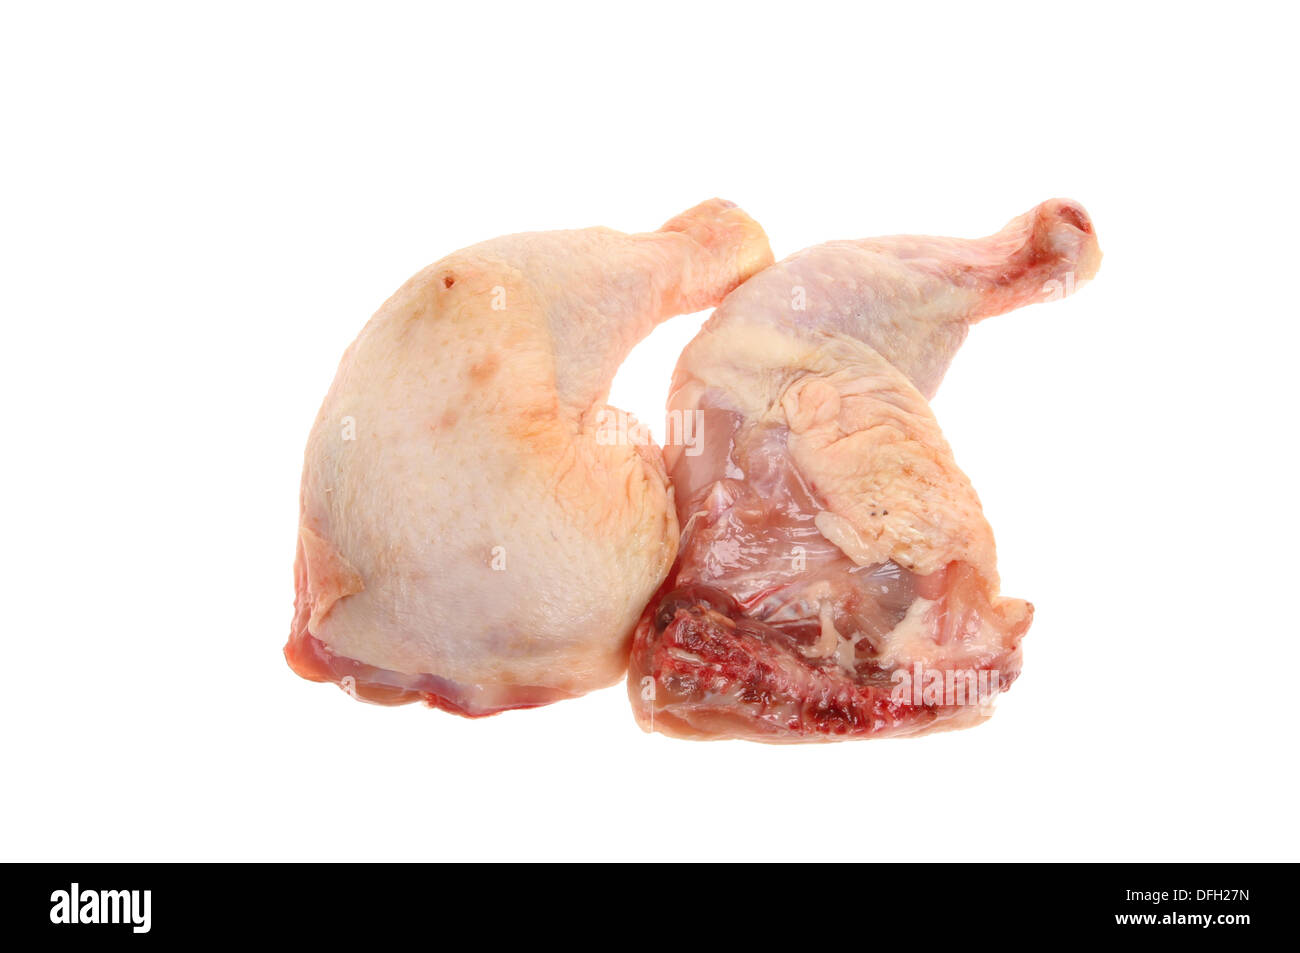 Two raw chicken legs isolated against white Stock Photo